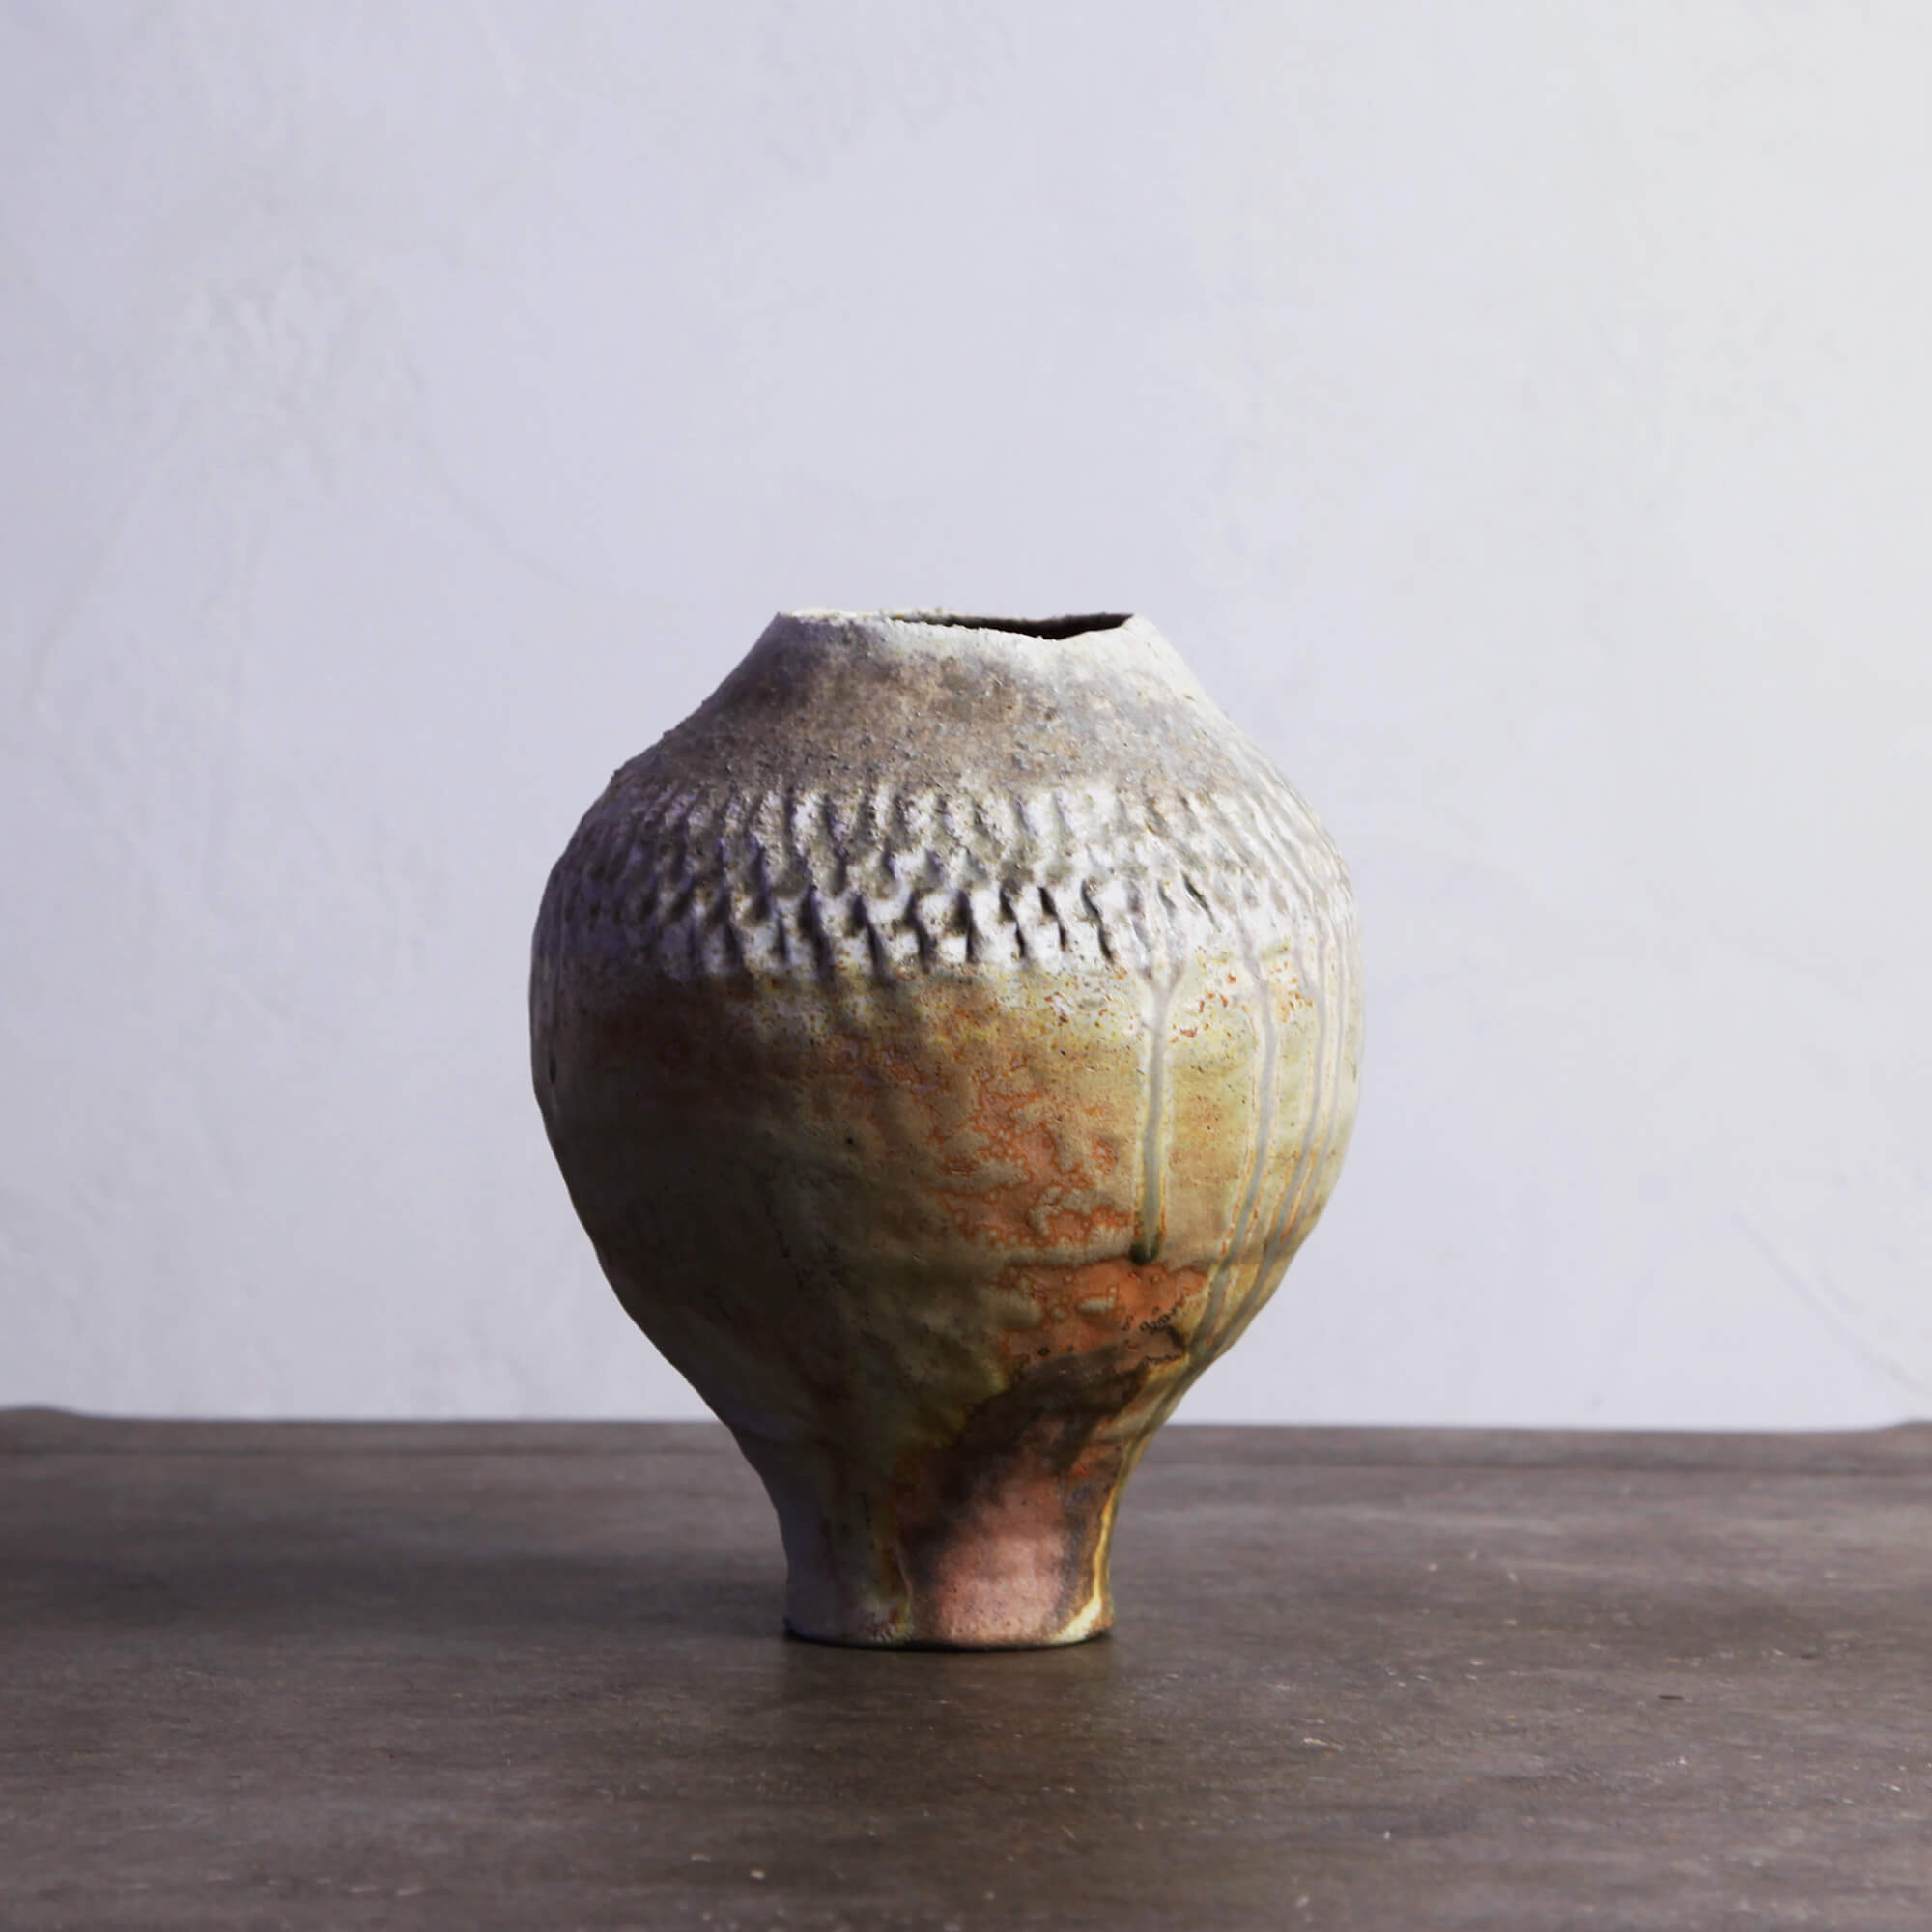 Wood-fired vessel by Young Mi Kim